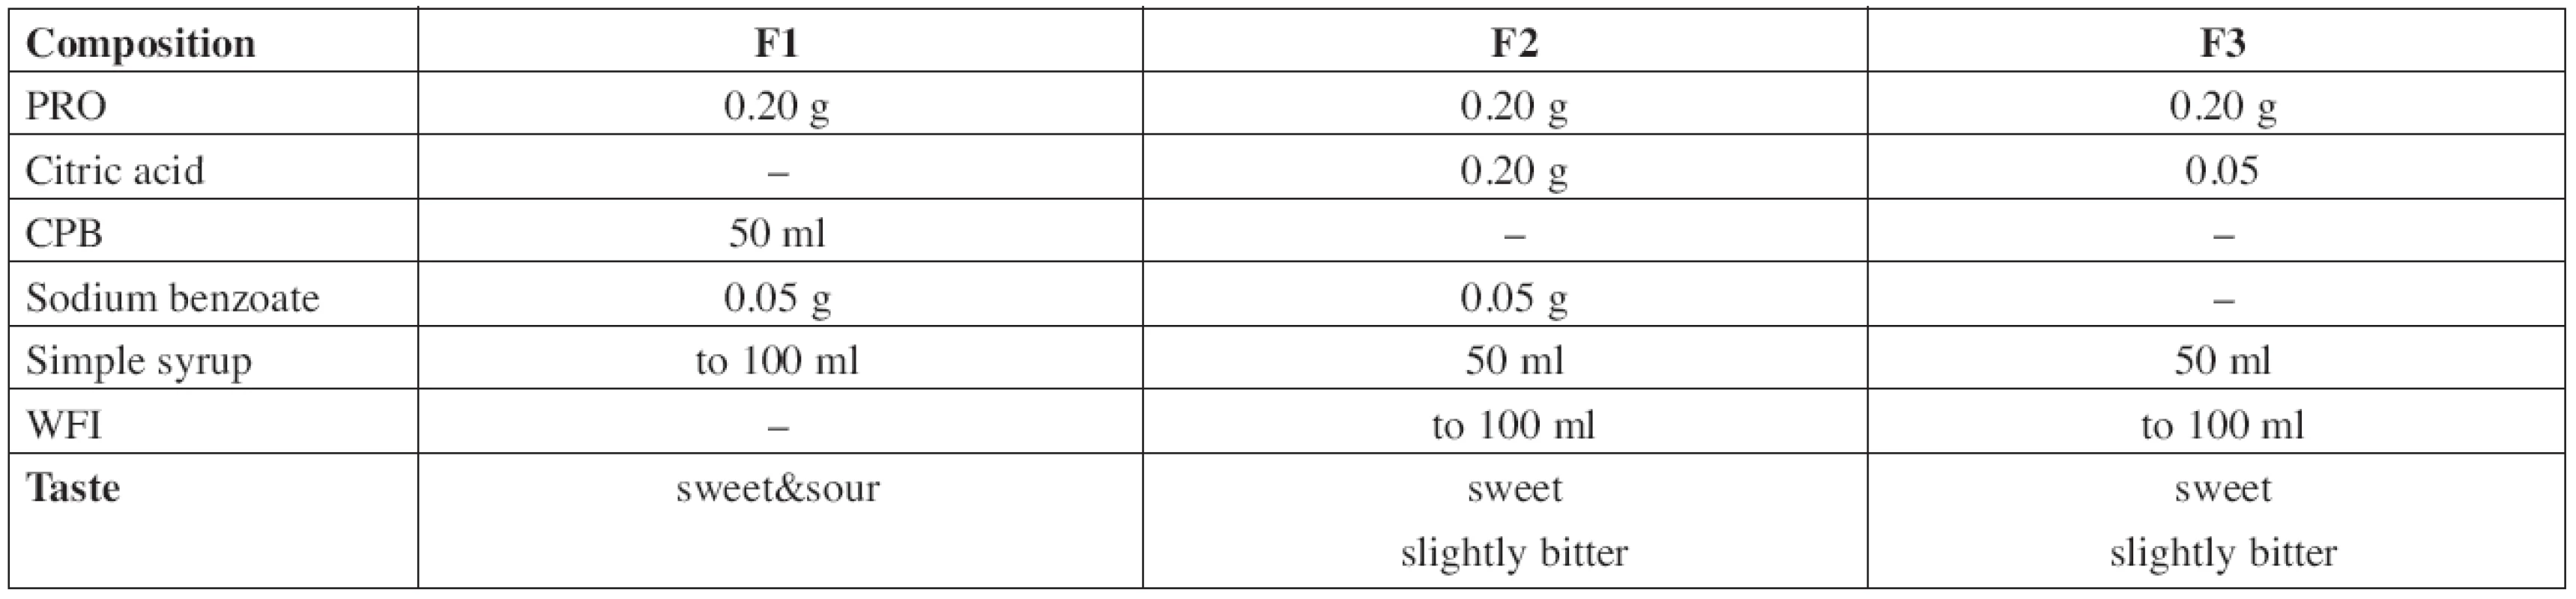 Composition of the evaluated propranolol hydrochloride solutions